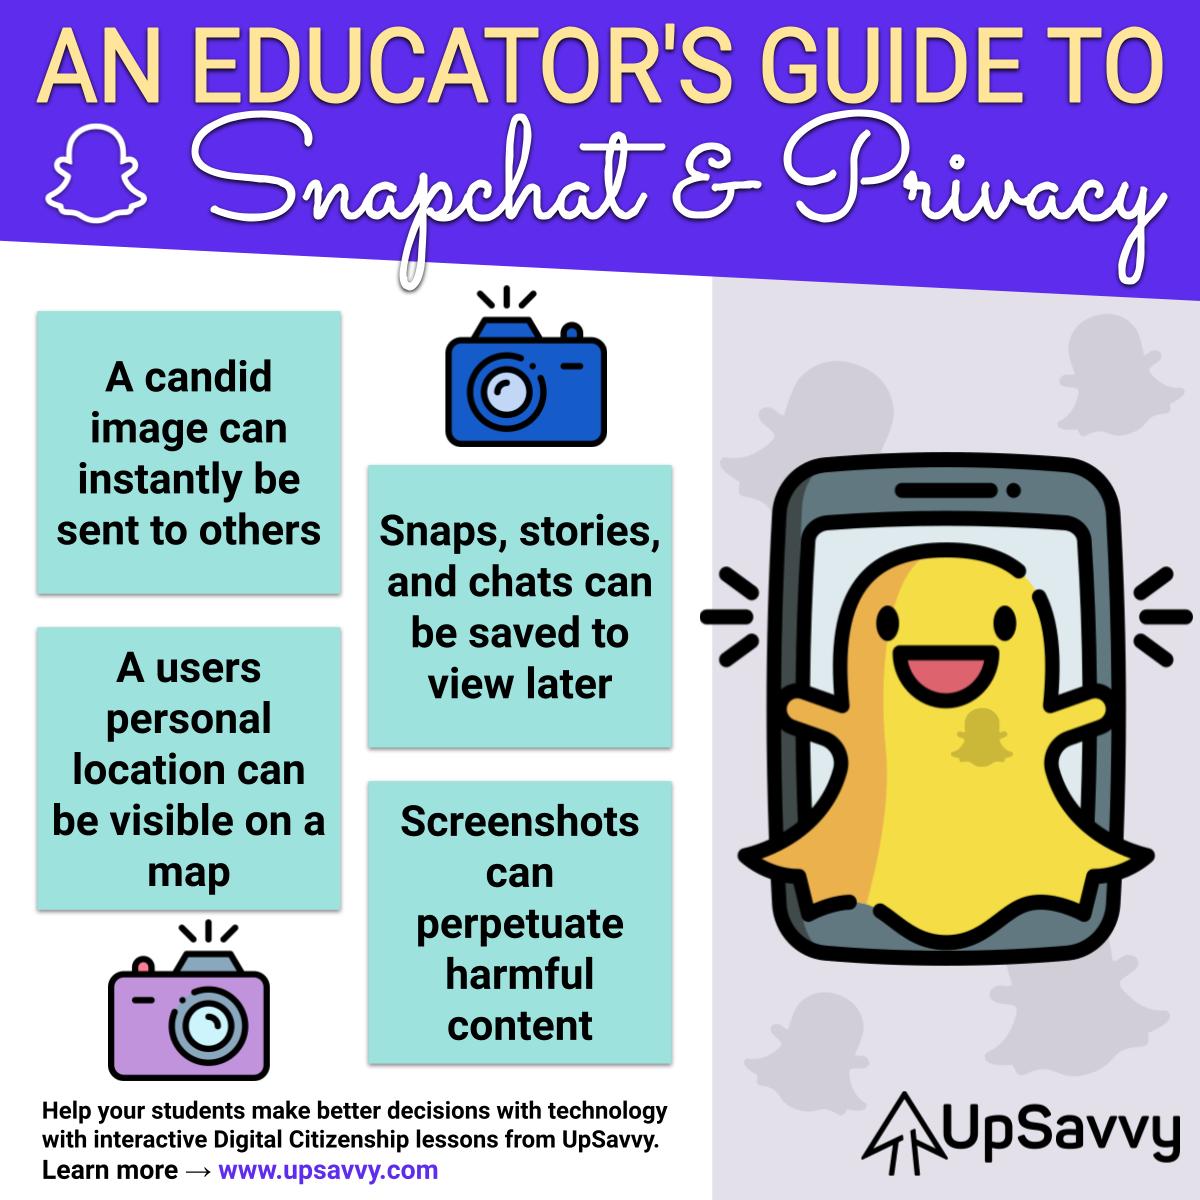 An Educator’s Guide to Snapchat and Privacy